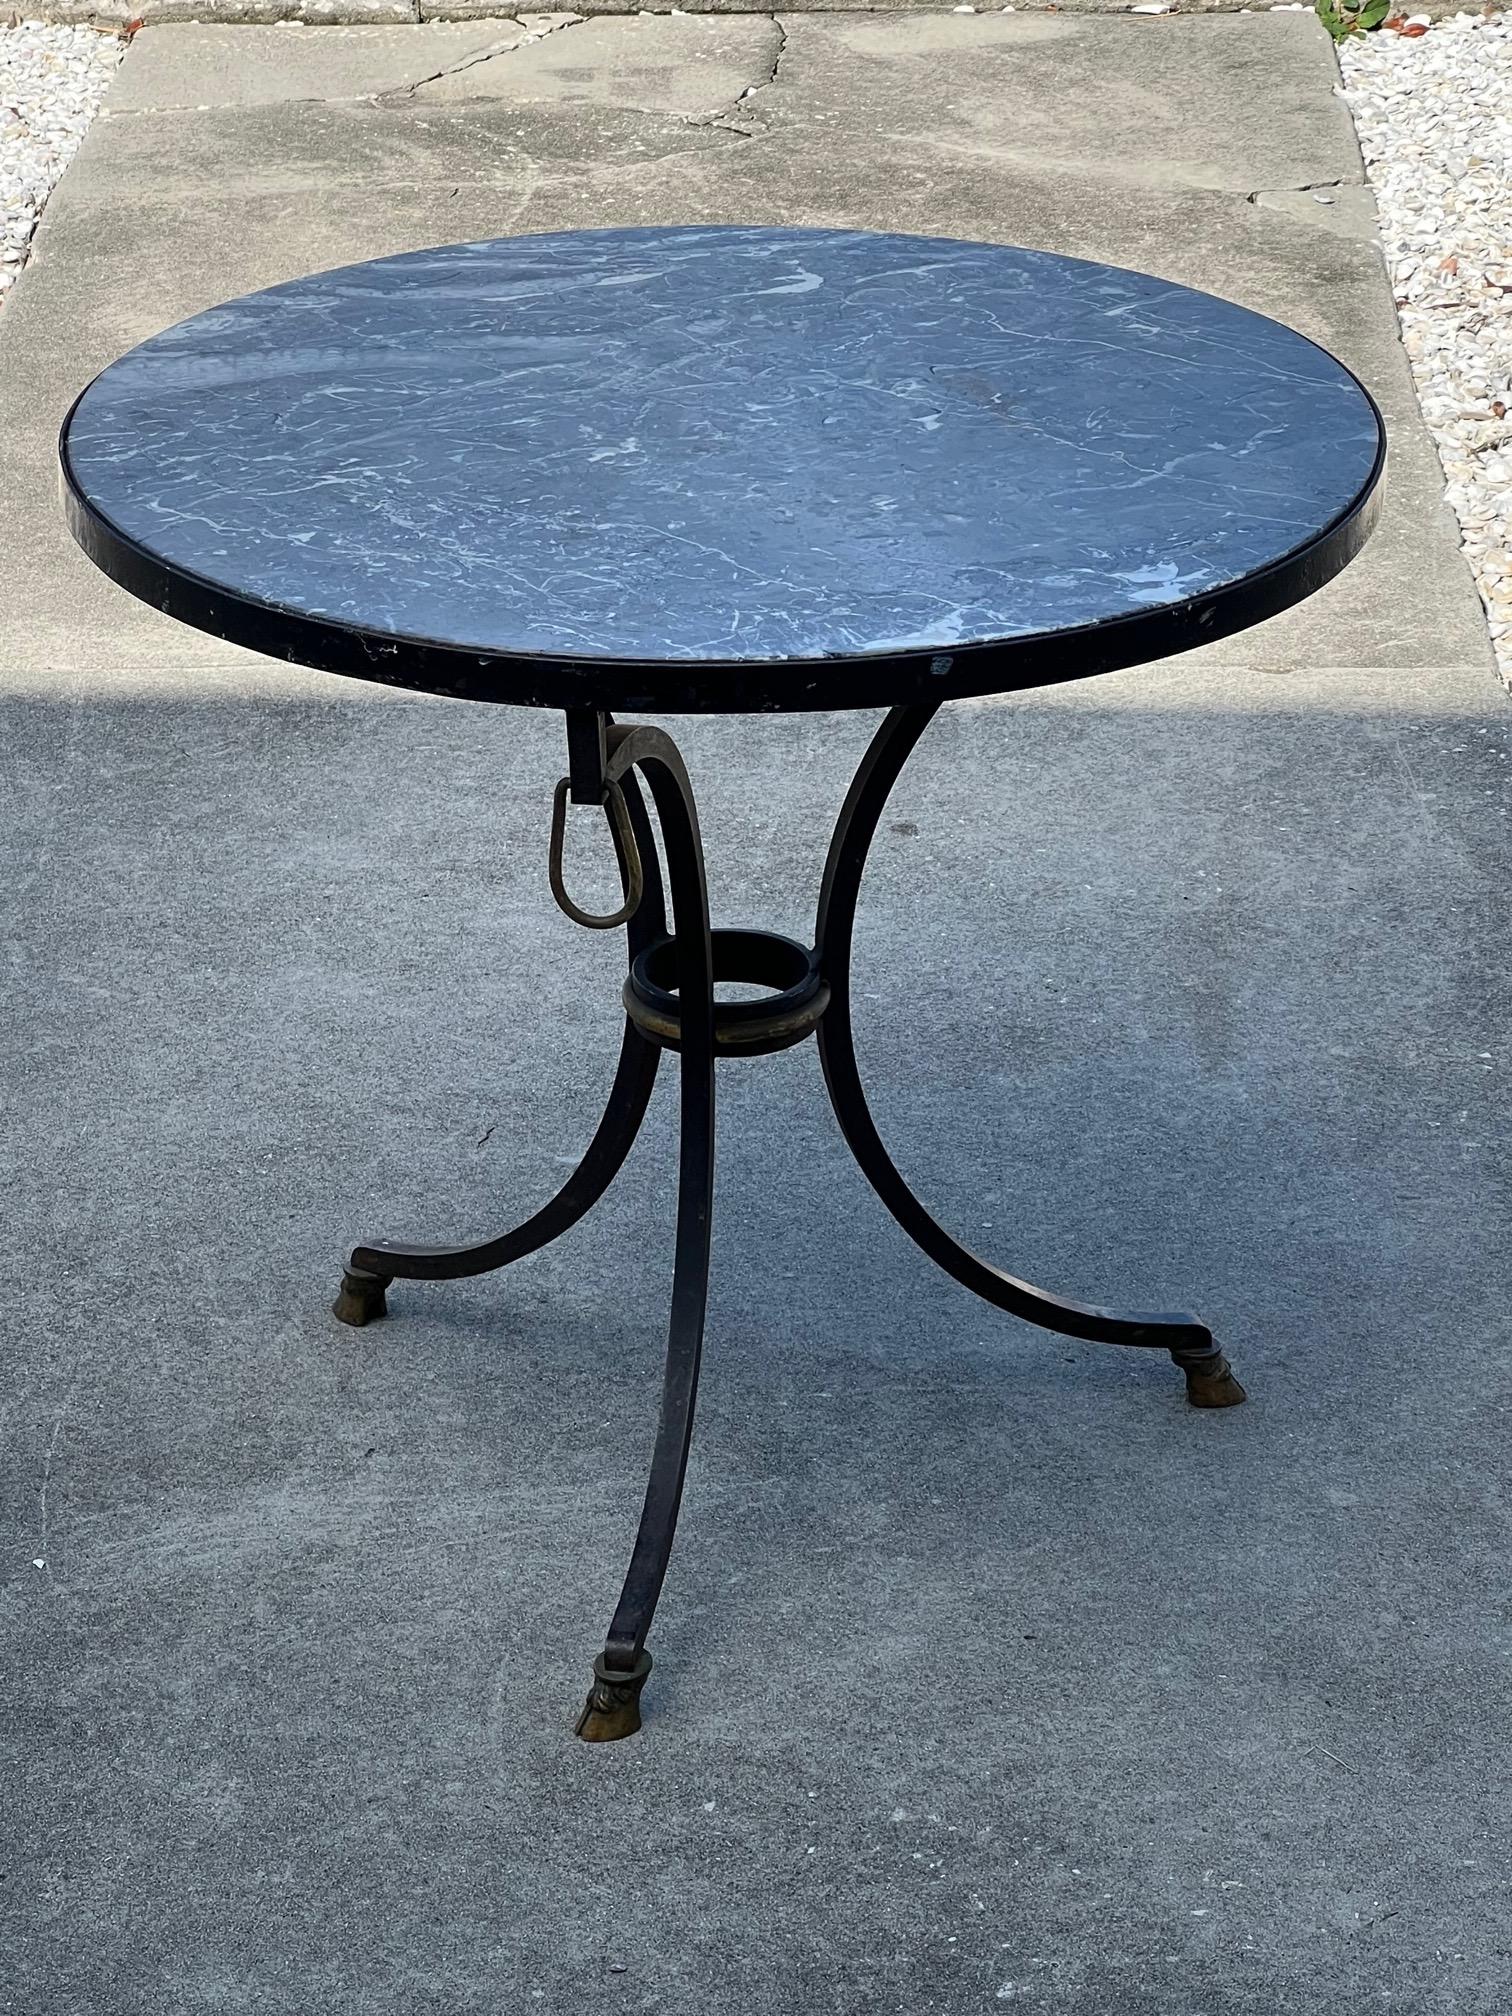 Mid-20th Century A Classic Wrought Iron Gueridon By Yale Burge ca' 1950's For Sale